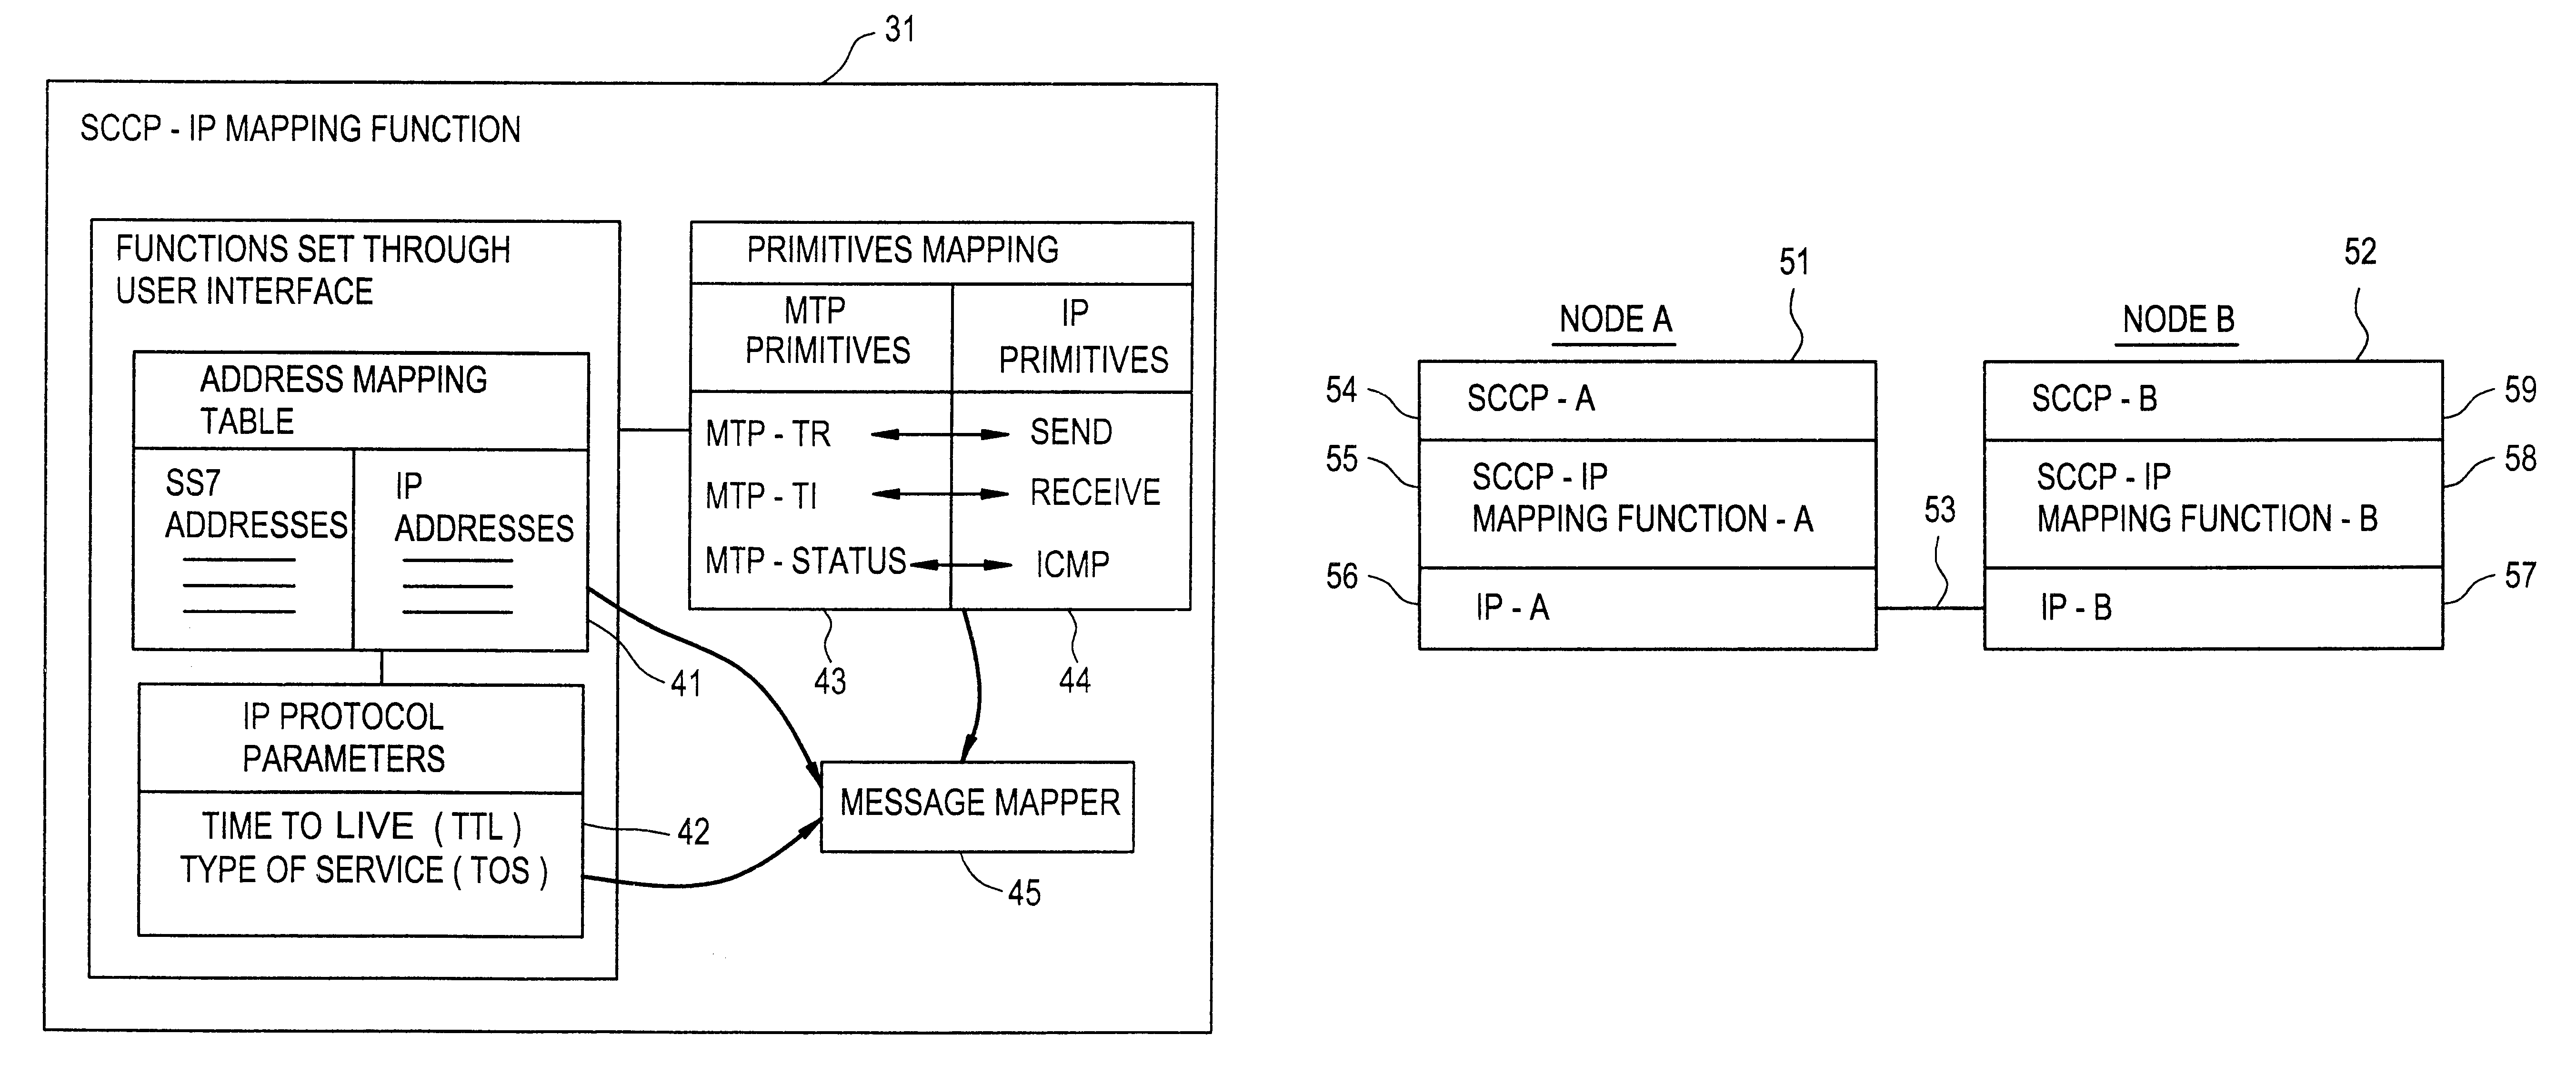 Mapping function and method of transmitting signaling system 7(SS7) telecommunications messages over data networks